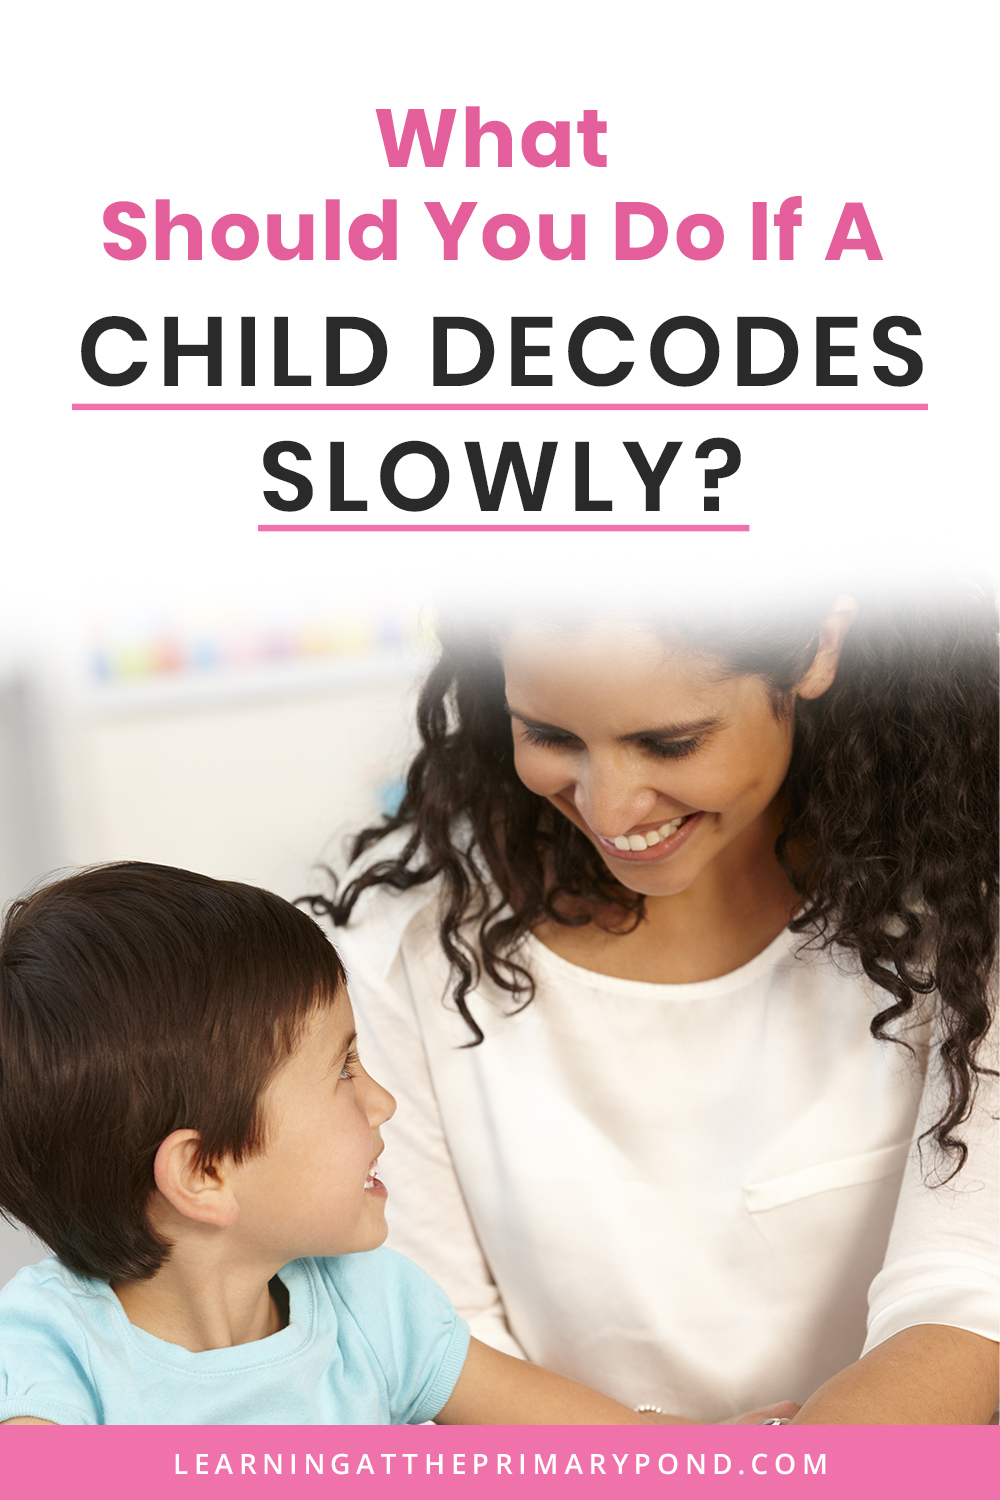 What Should You Do If A Child Decodes Slowly?